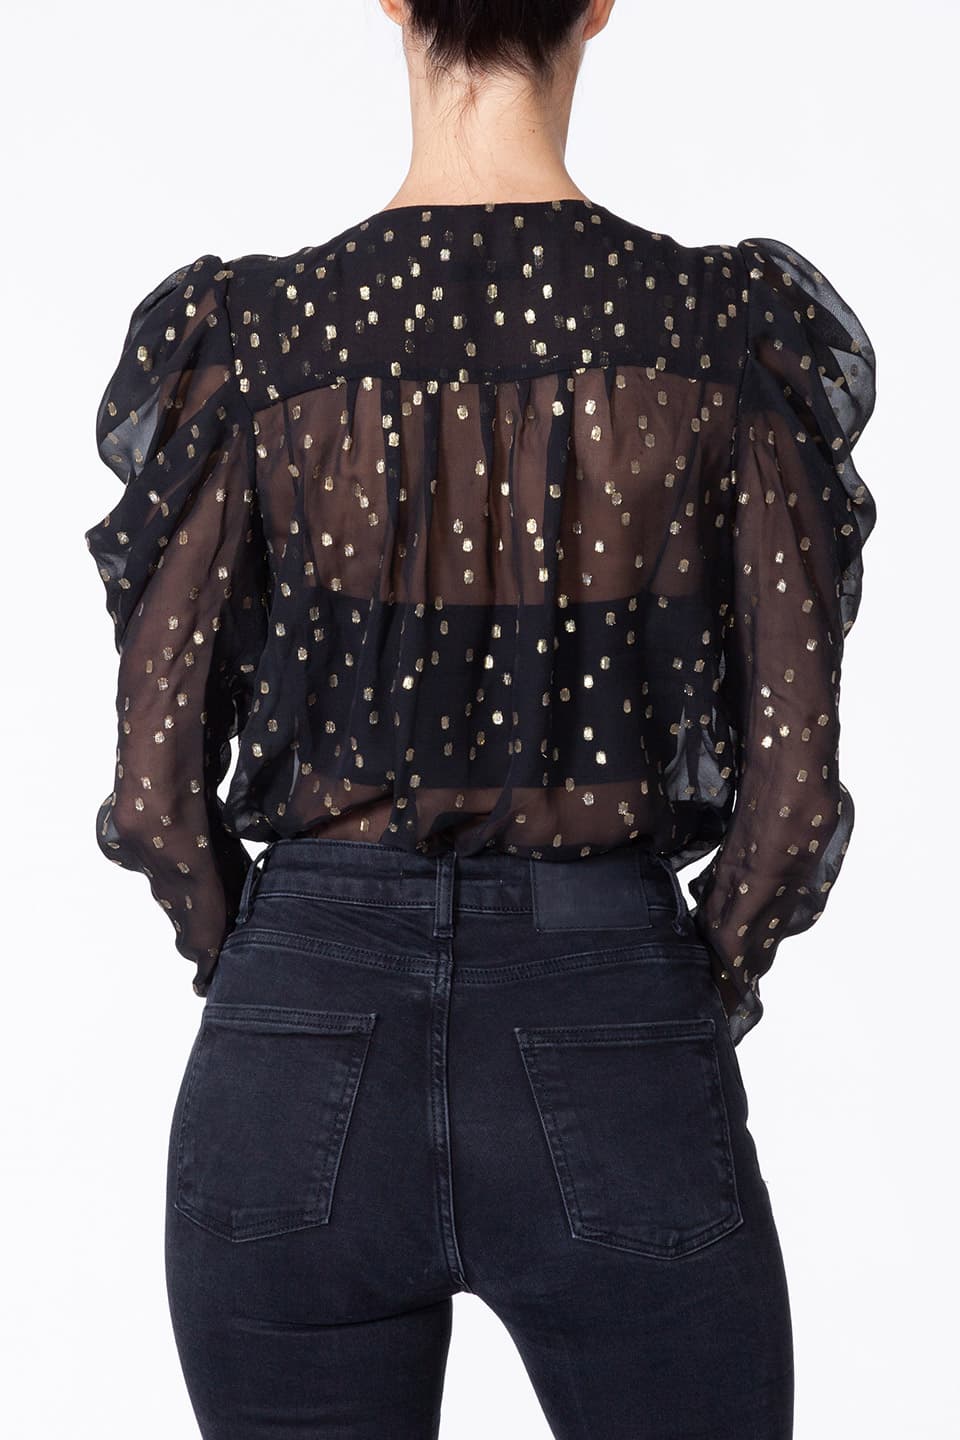 Thumbnail for Product gallery 5, Buy Nima Black Body Blouse 